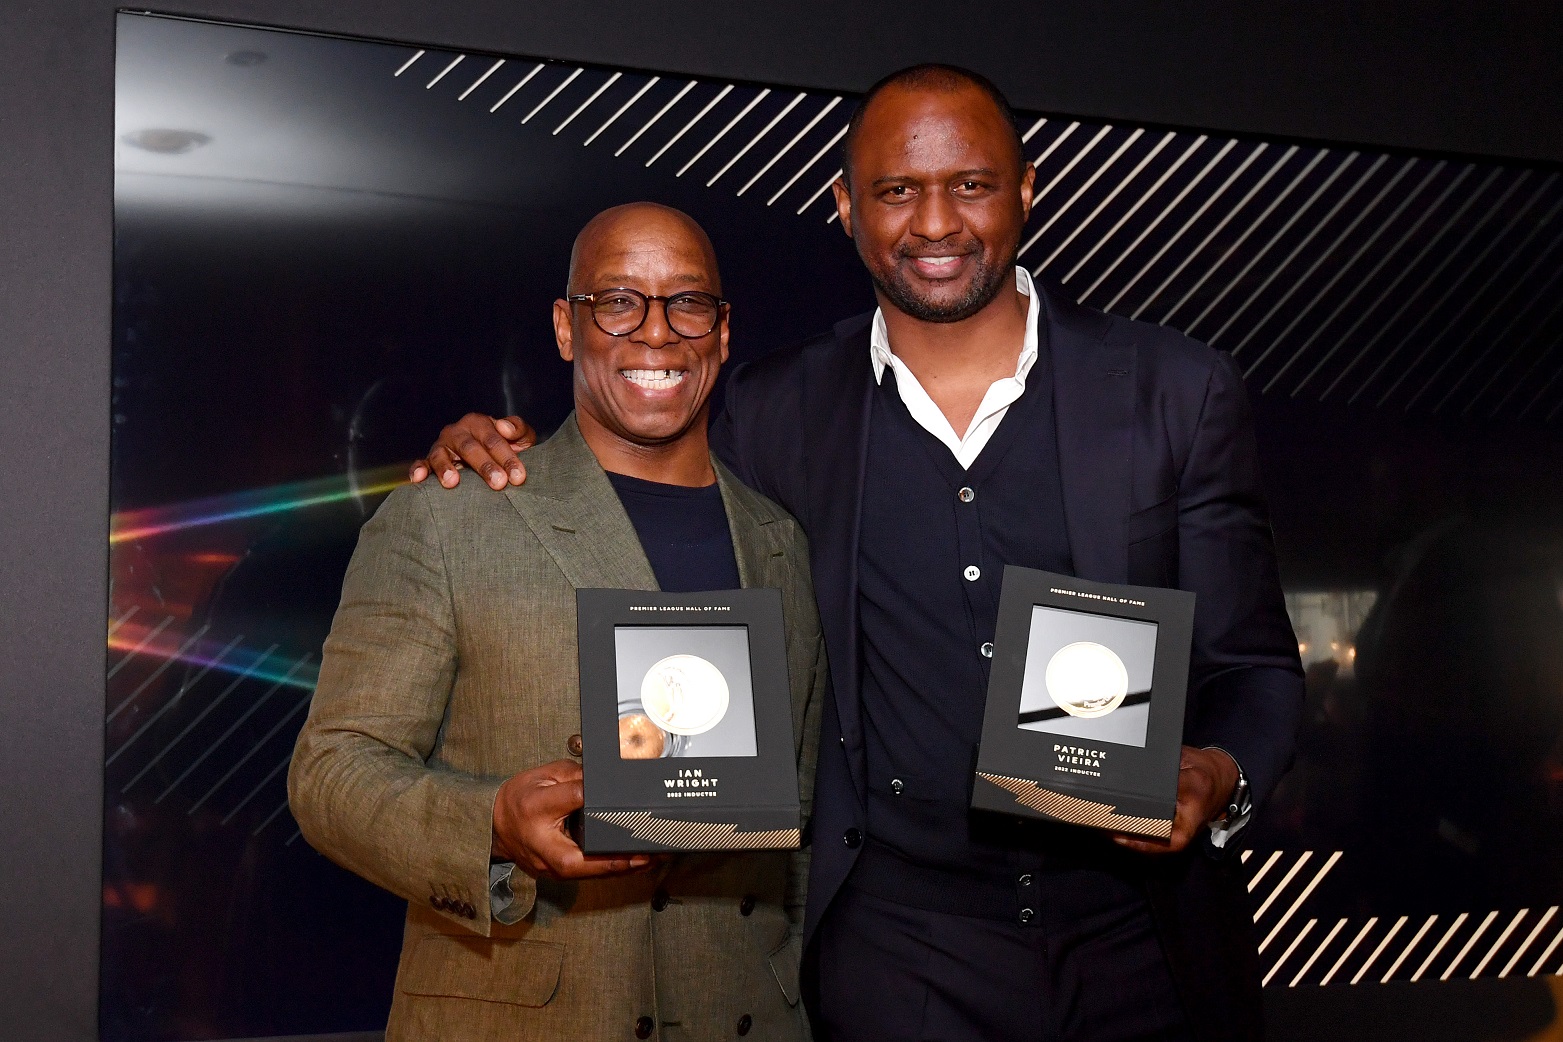 A tribute to Ian Wright on being honoured in the Premier League Hall of Fame